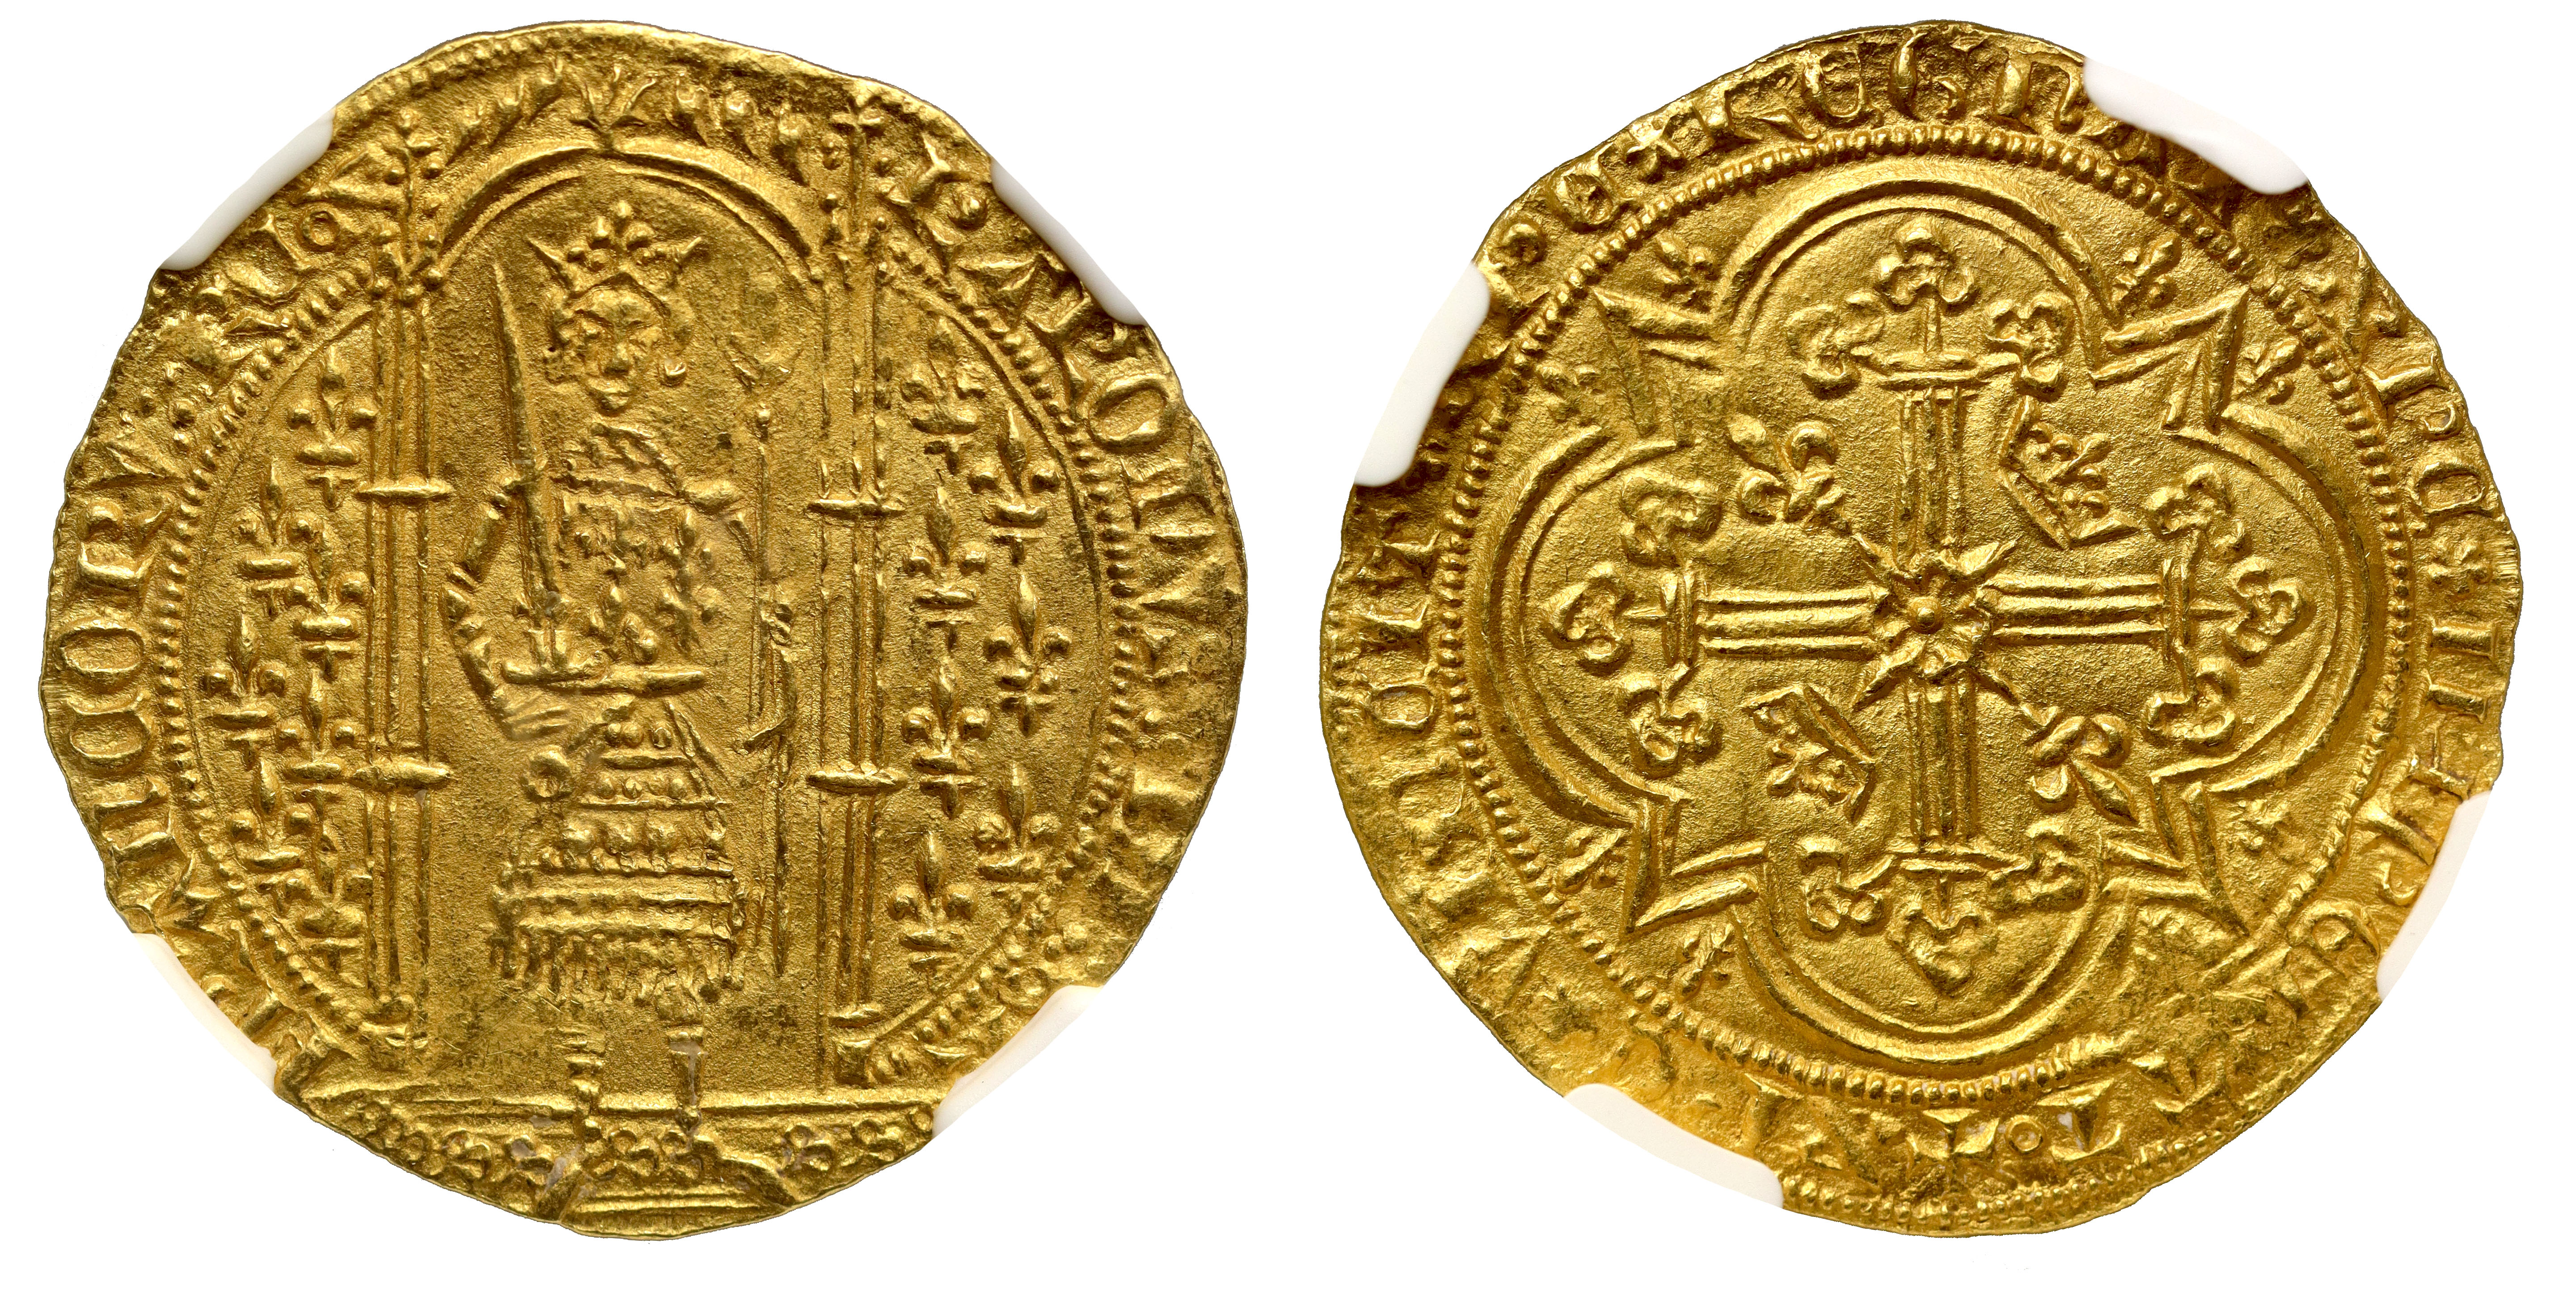 France, Charles V (1364-80), gold Franc … Pied, undated (authorized 20 April 1365), King standing